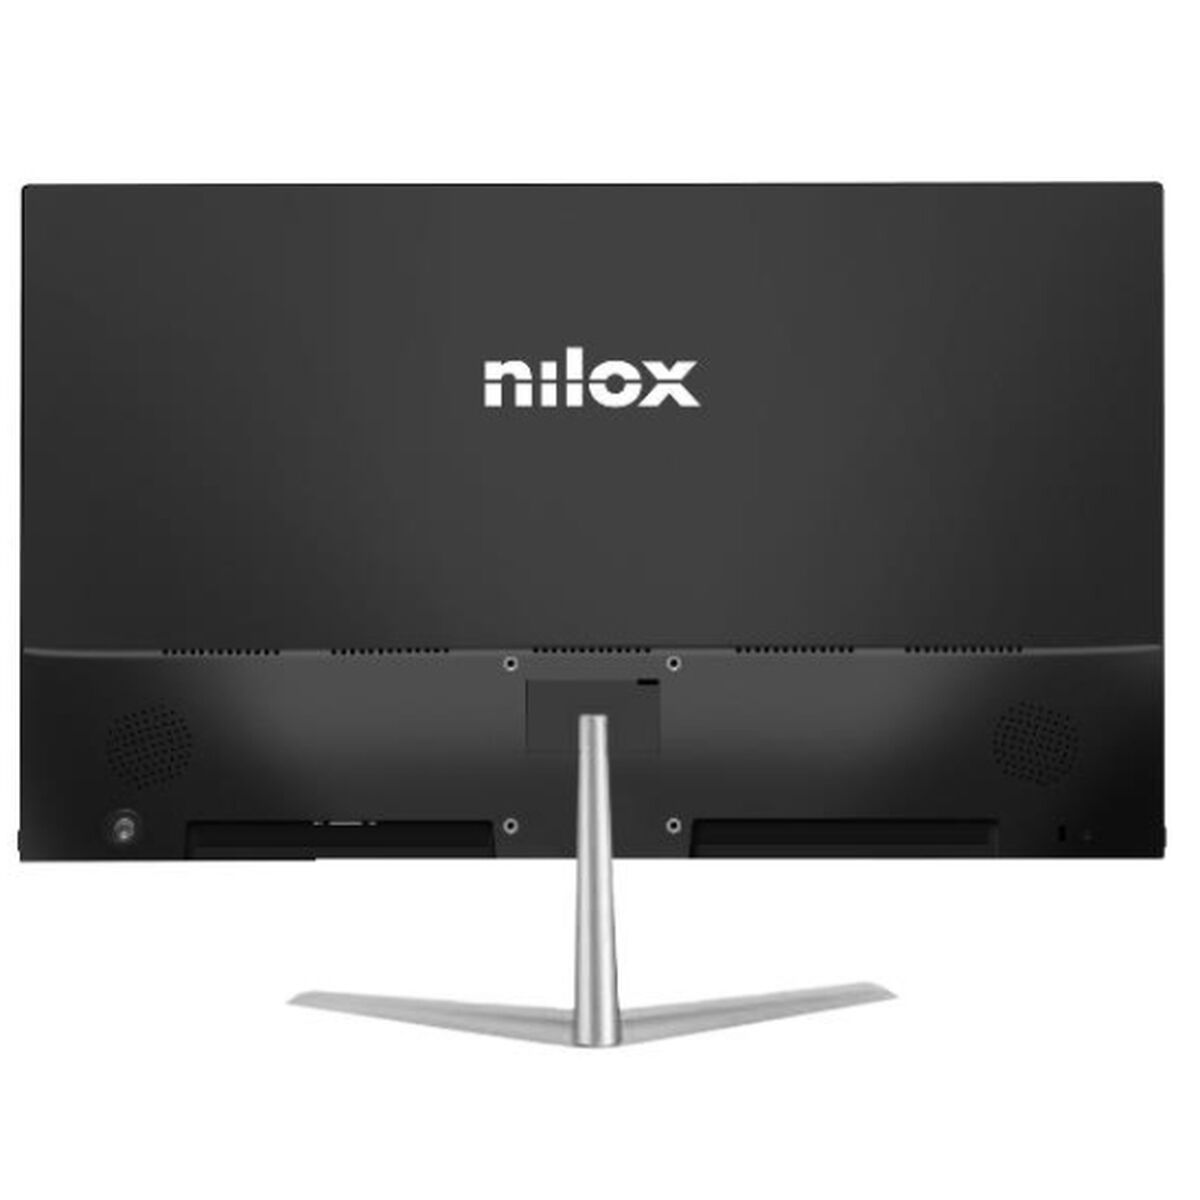 Monitor Nilox NXM24FHD01 Full HD 23,8" 75 Hz, Nilox, Computing, monitor-nilox-nxm24fhd01-full-hd-23-8-75-hz, Brand_Nilox, category-reference-2609, category-reference-2642, category-reference-2644, category-reference-t-19685, computers / peripherals, Condition_NEW, office, Price_100 - 200, Teleworking, RiotNook